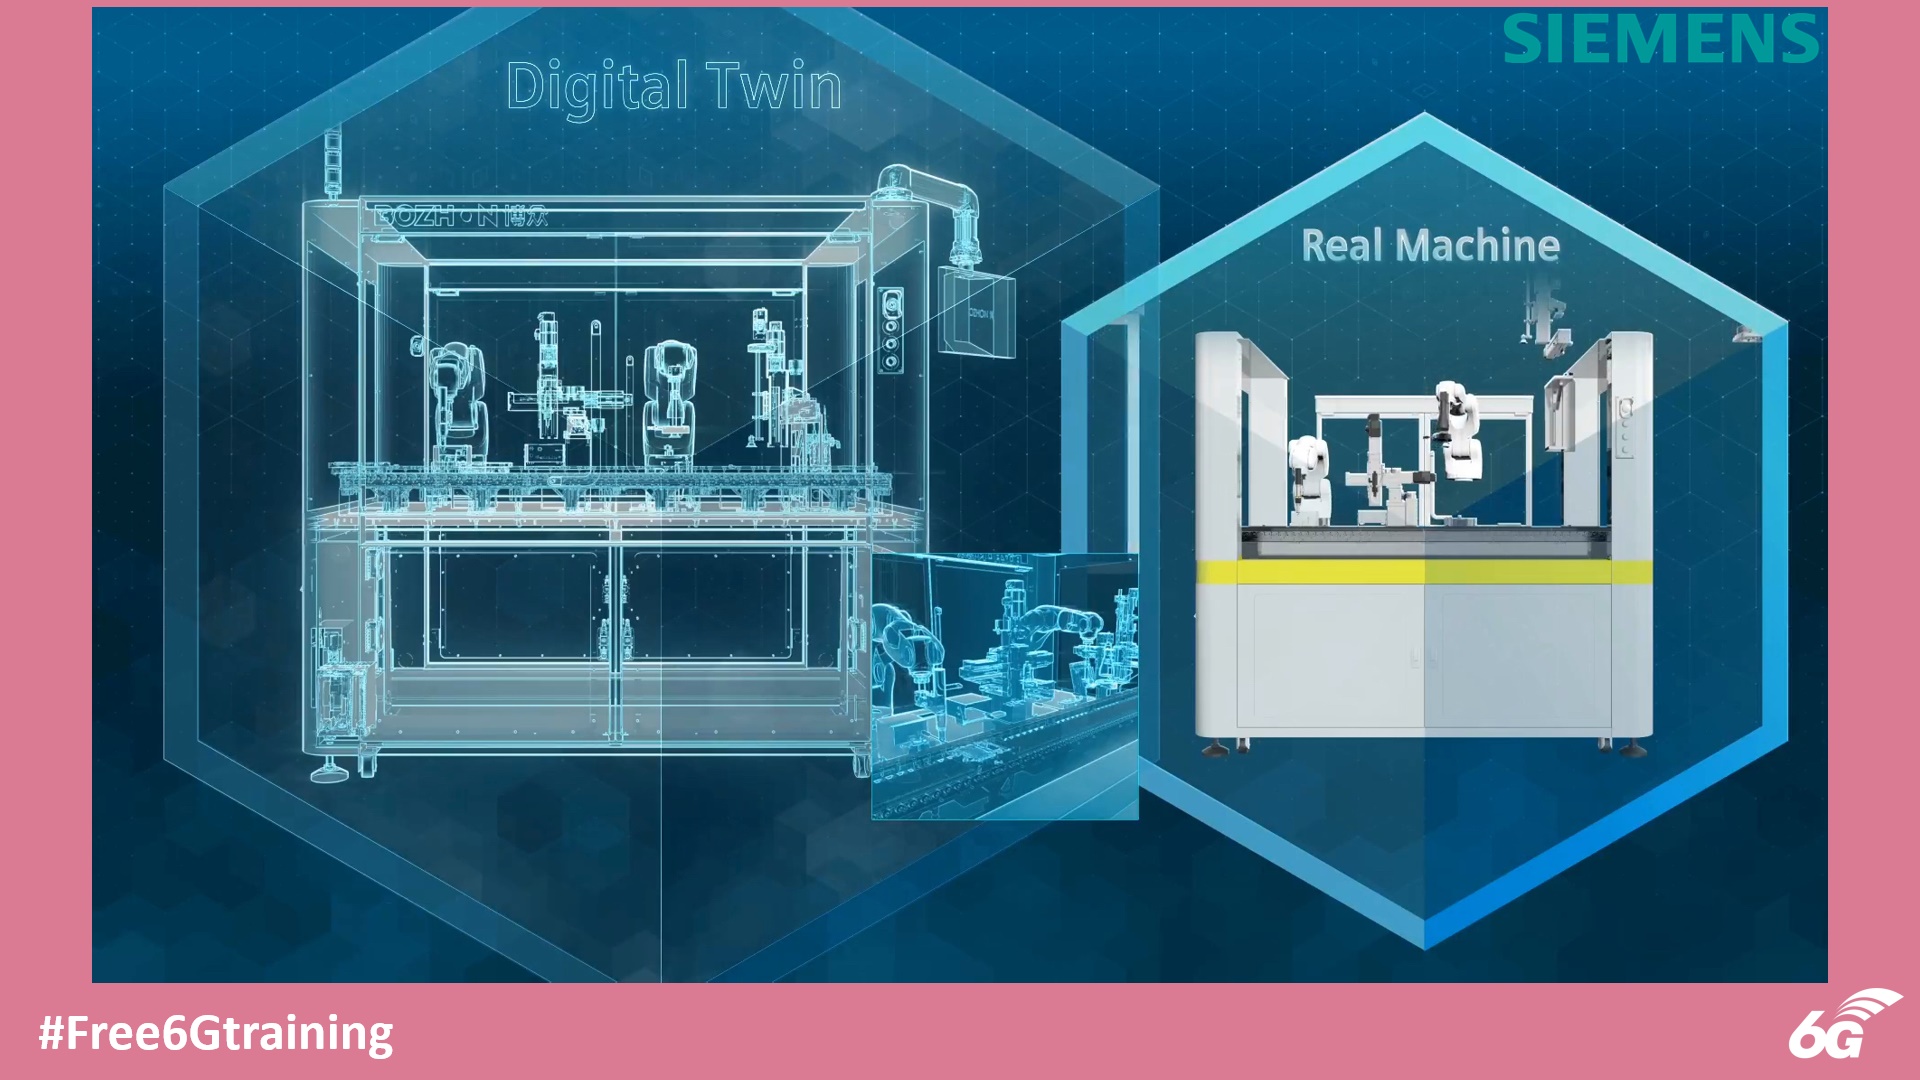 master thesis digital twin